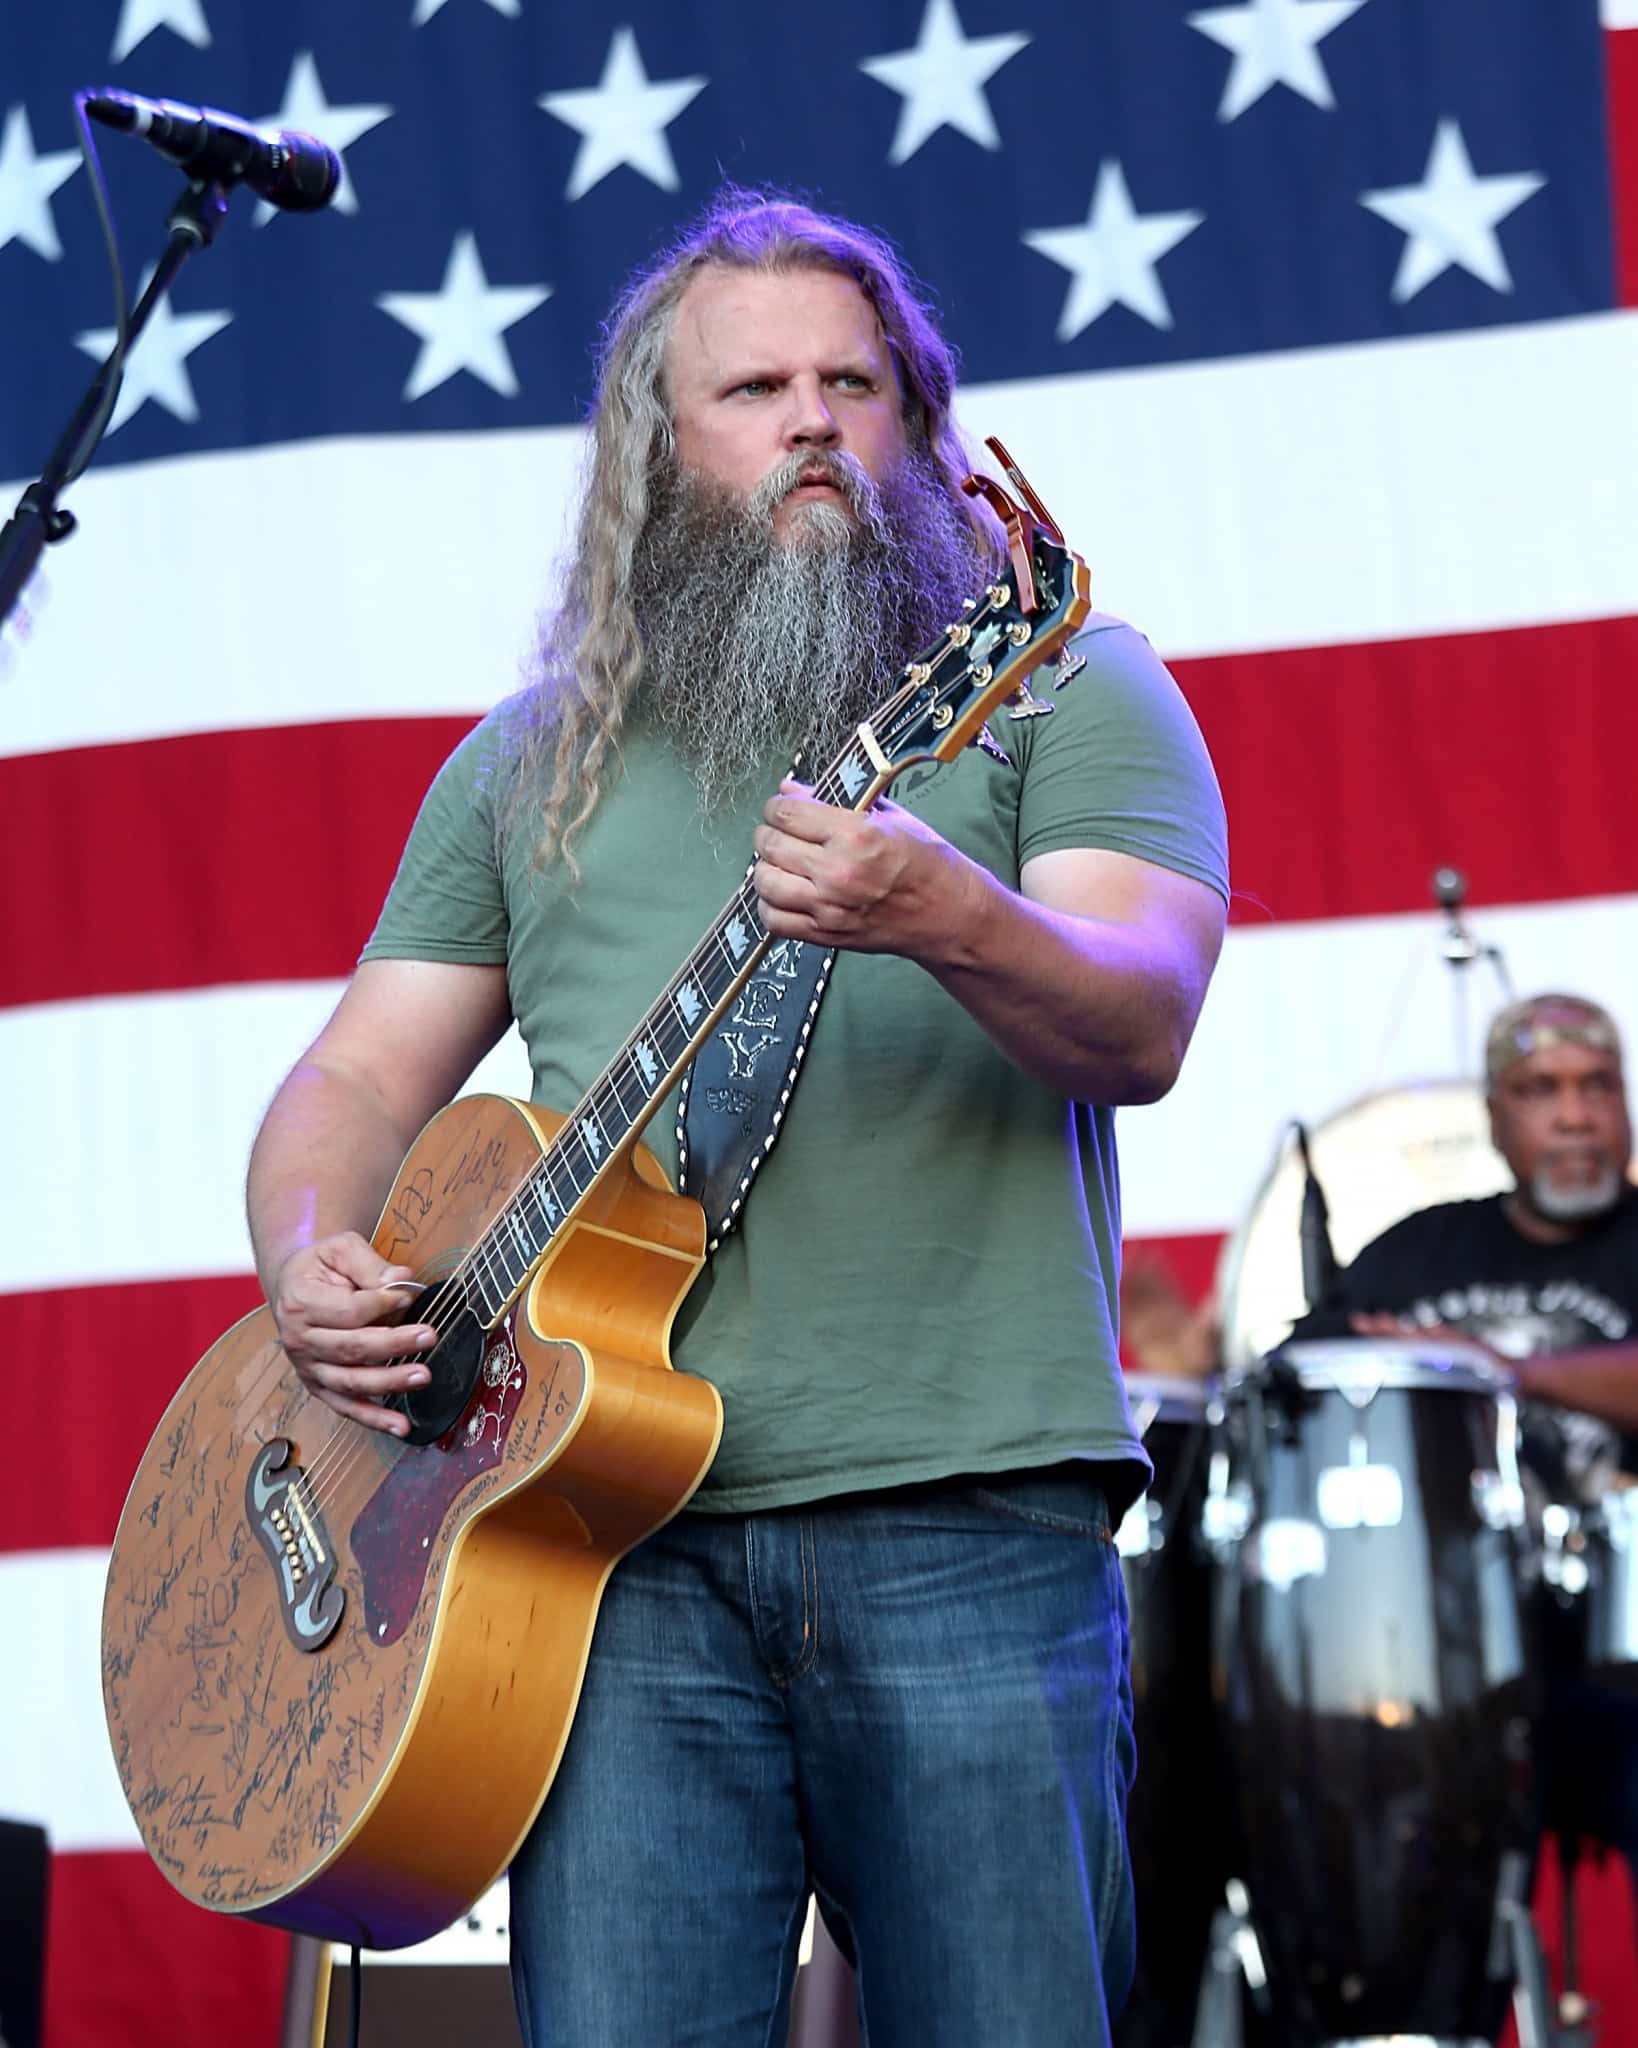 AUSTIN, TEXAS - JULY 04: Jamey Johnson performs in concert during the annual Willie Nelson 4th of July Picnic at the Austin360 Amphitheater on July 4, 2017 in Austin, Texas. (Photo by Gary Miller/Getty Images)